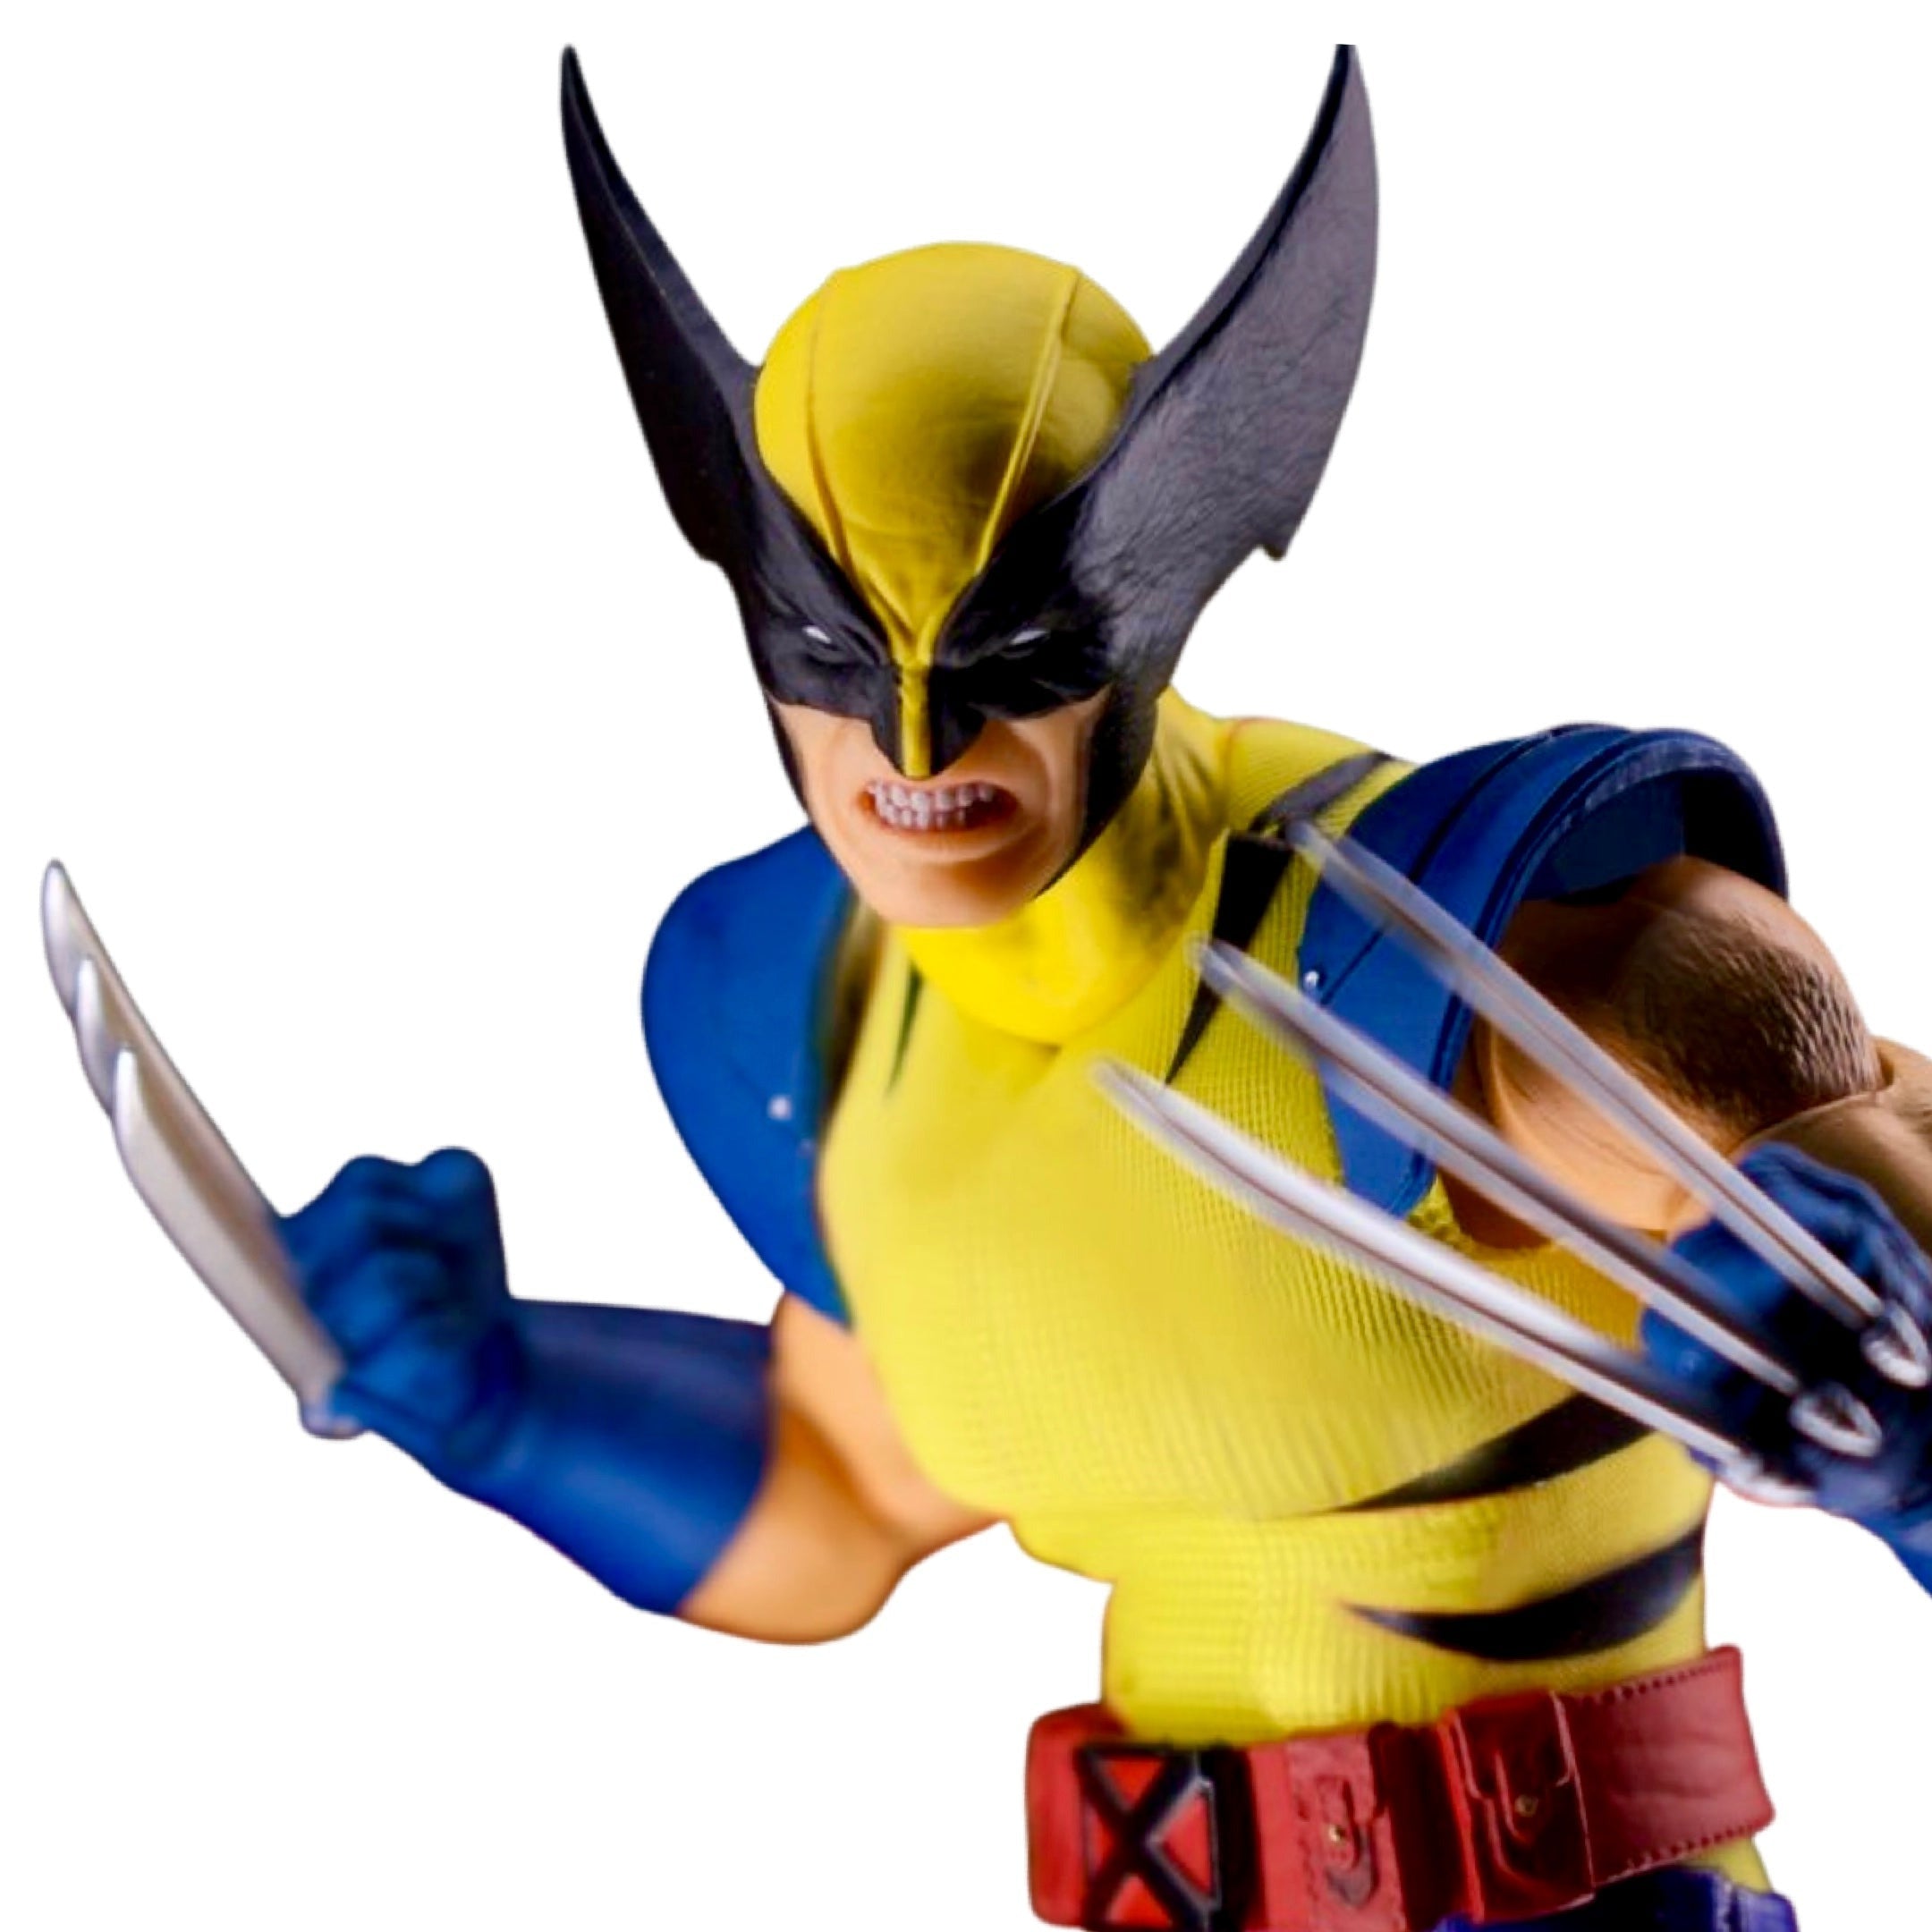 Marvel One:12 Collective Wolverine | Deluxe Steel Box Edition